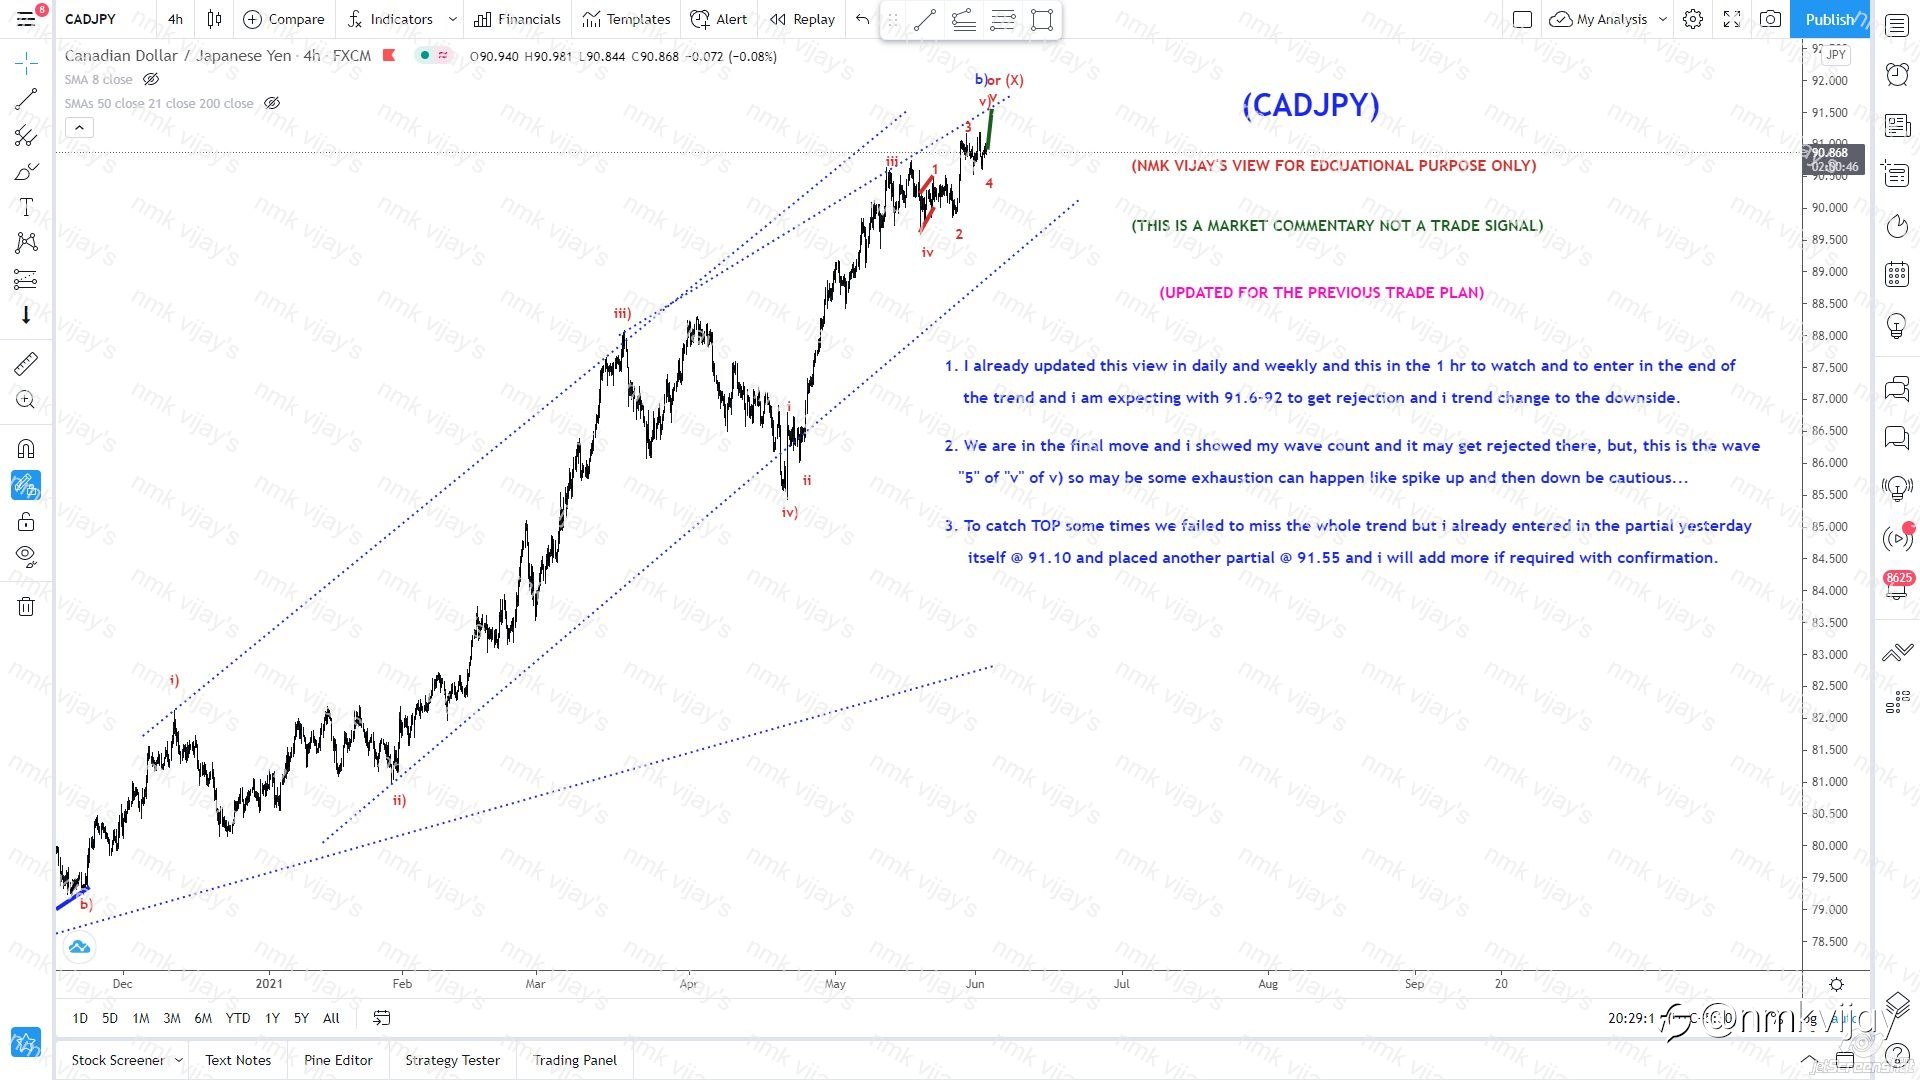 CADJPY-We are in the final move still 70 pips to go to end the trend in bullish after bearish ?